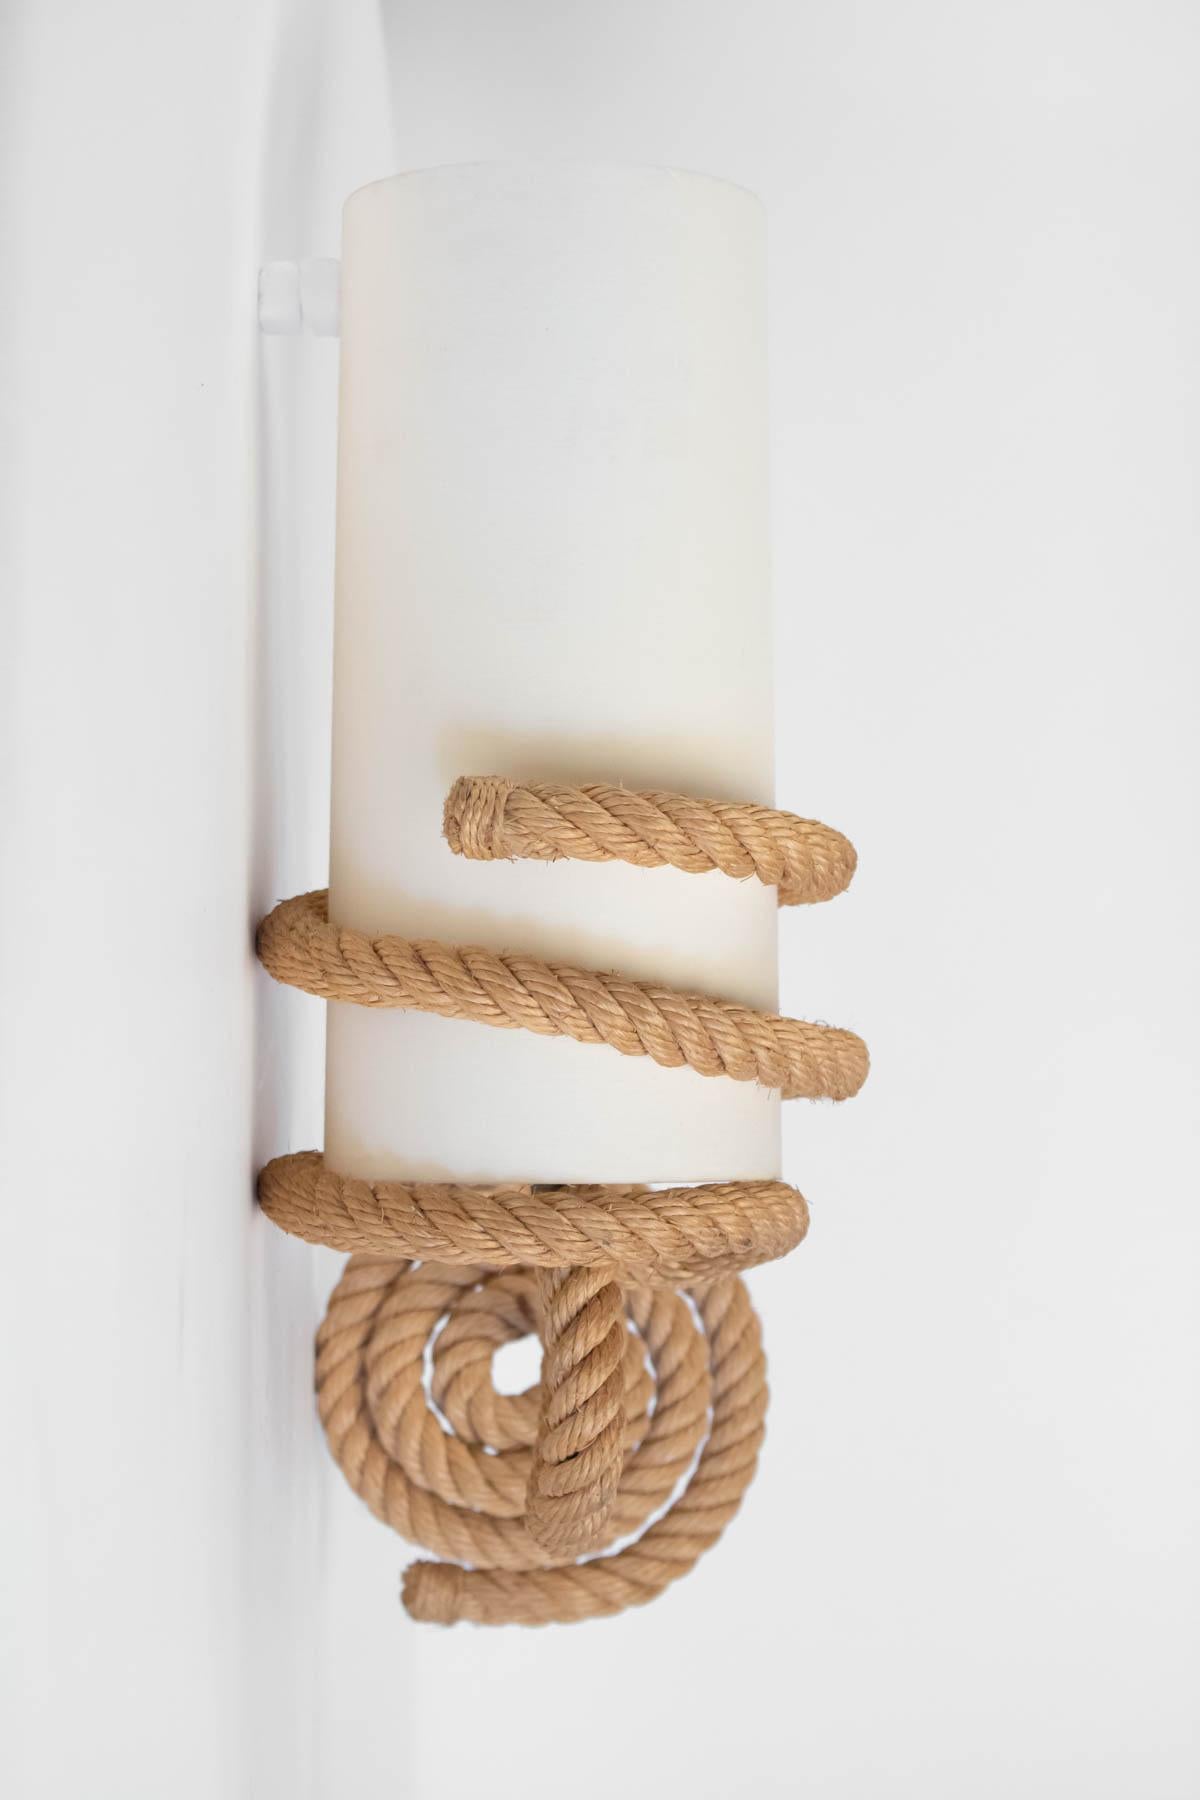 The sconces are made of weaved rope. 
The two cylindrical white cotton shades are hold by a rope spiral.
One bulb per sconce.

Adrien Audoux and Frida Minet are known for their rope lights and furniture. Their first workshop has been founded in 1929